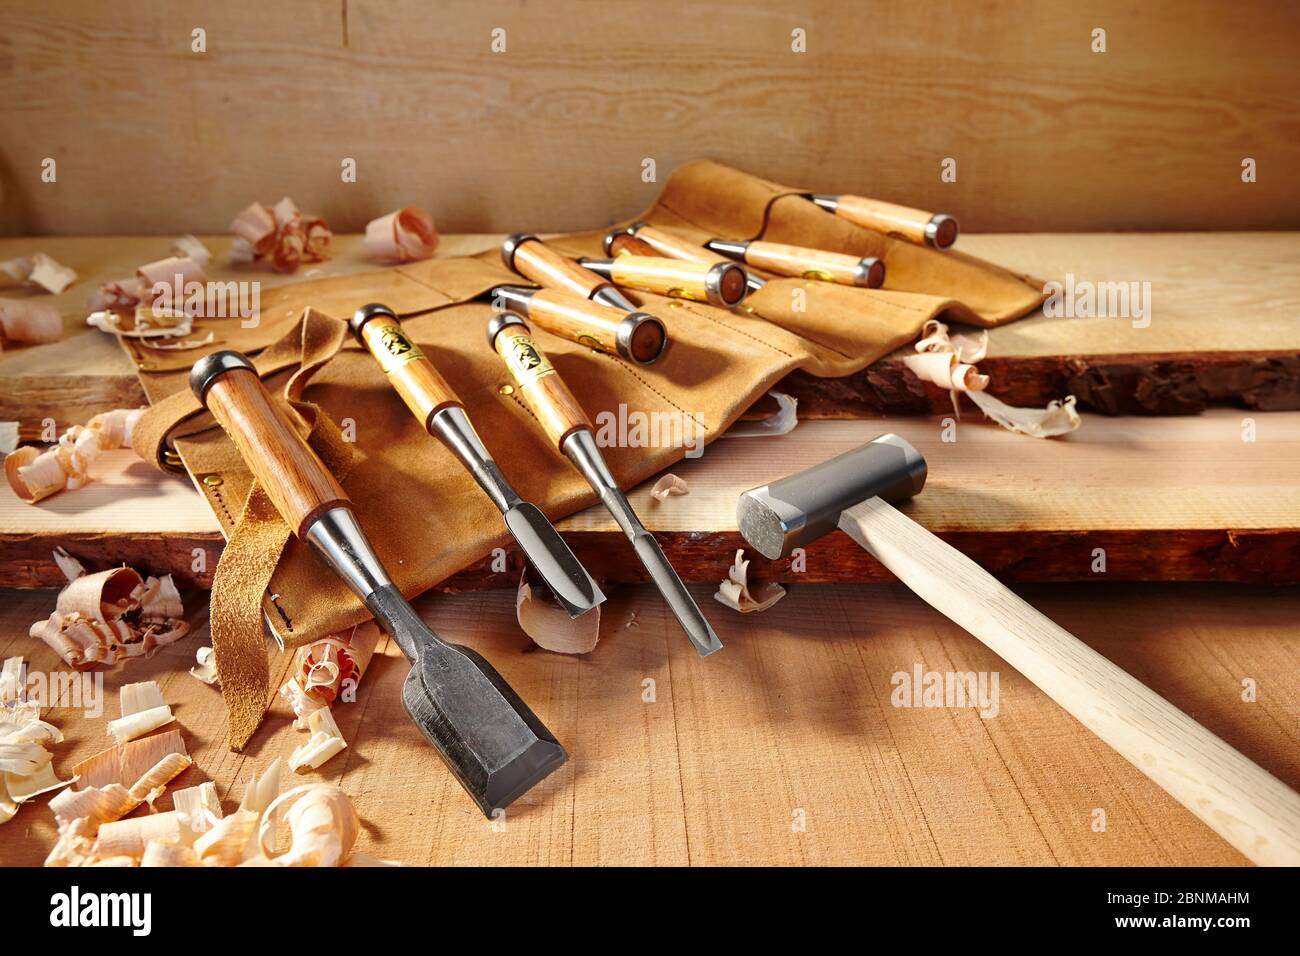 Woodworking tools from Japan, series, Japanese woodworking tools, overview of various wood chisels and hammer, partly in a leather roll case, arranged on wood with wood shavings Stock Photo